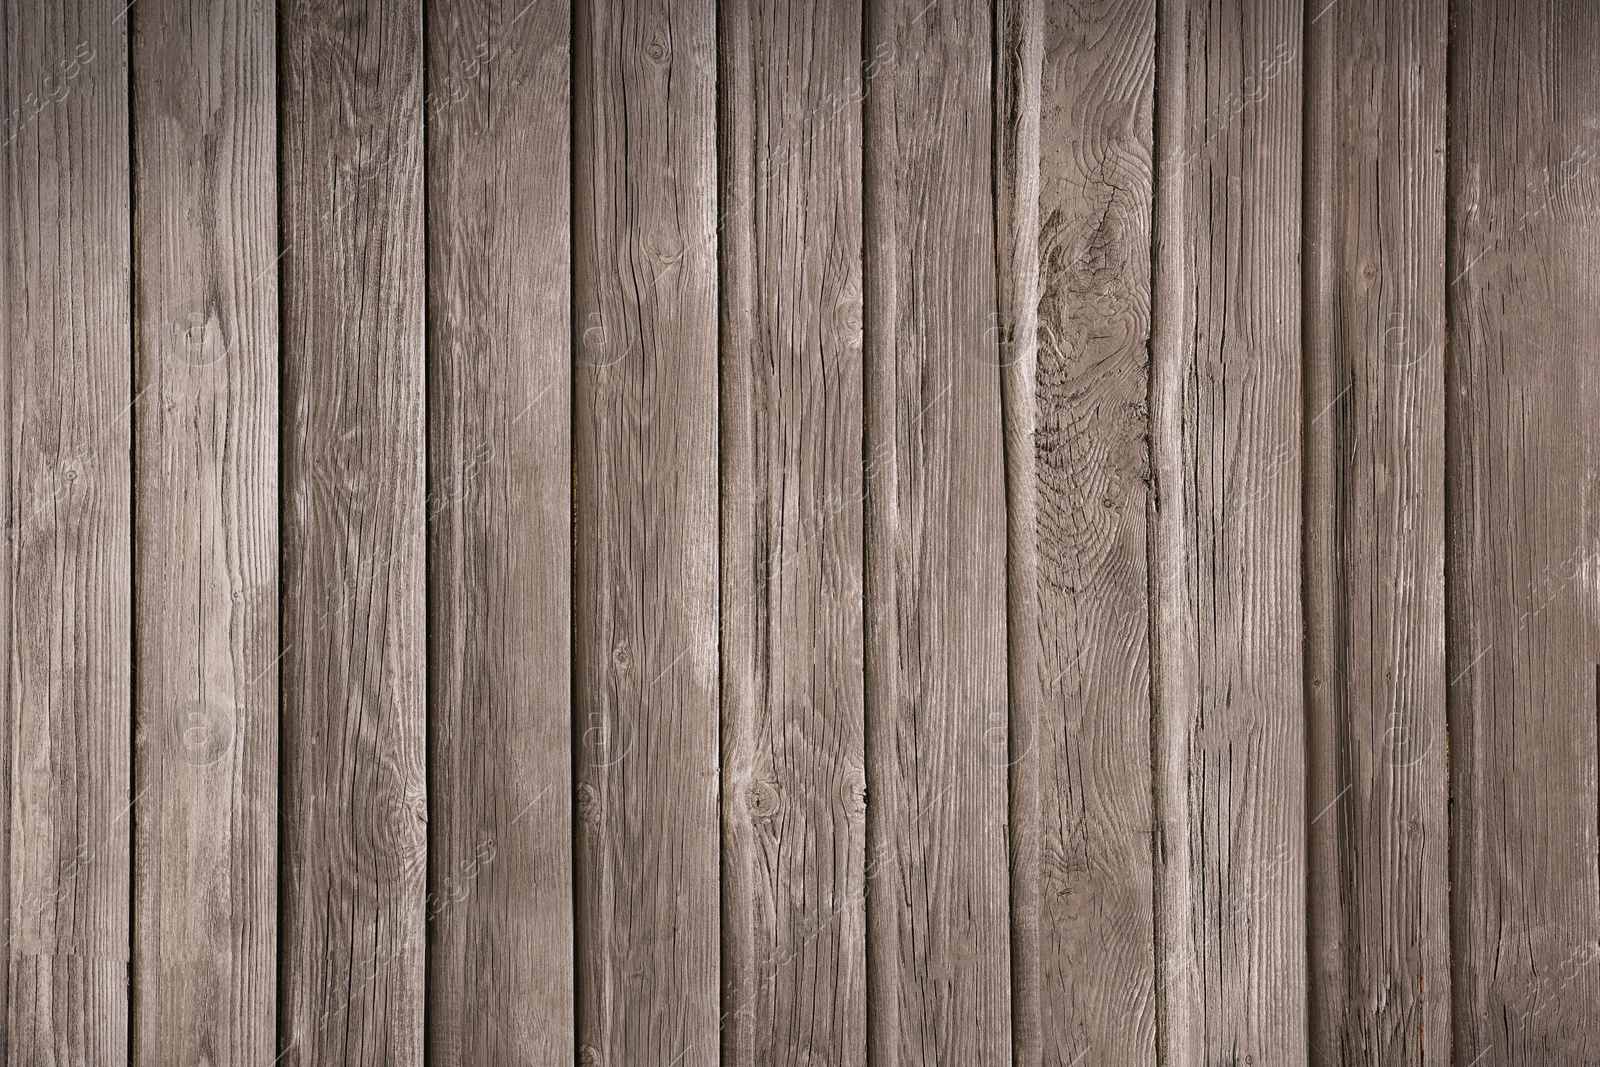 Photo of Texture of old wooden surface as background